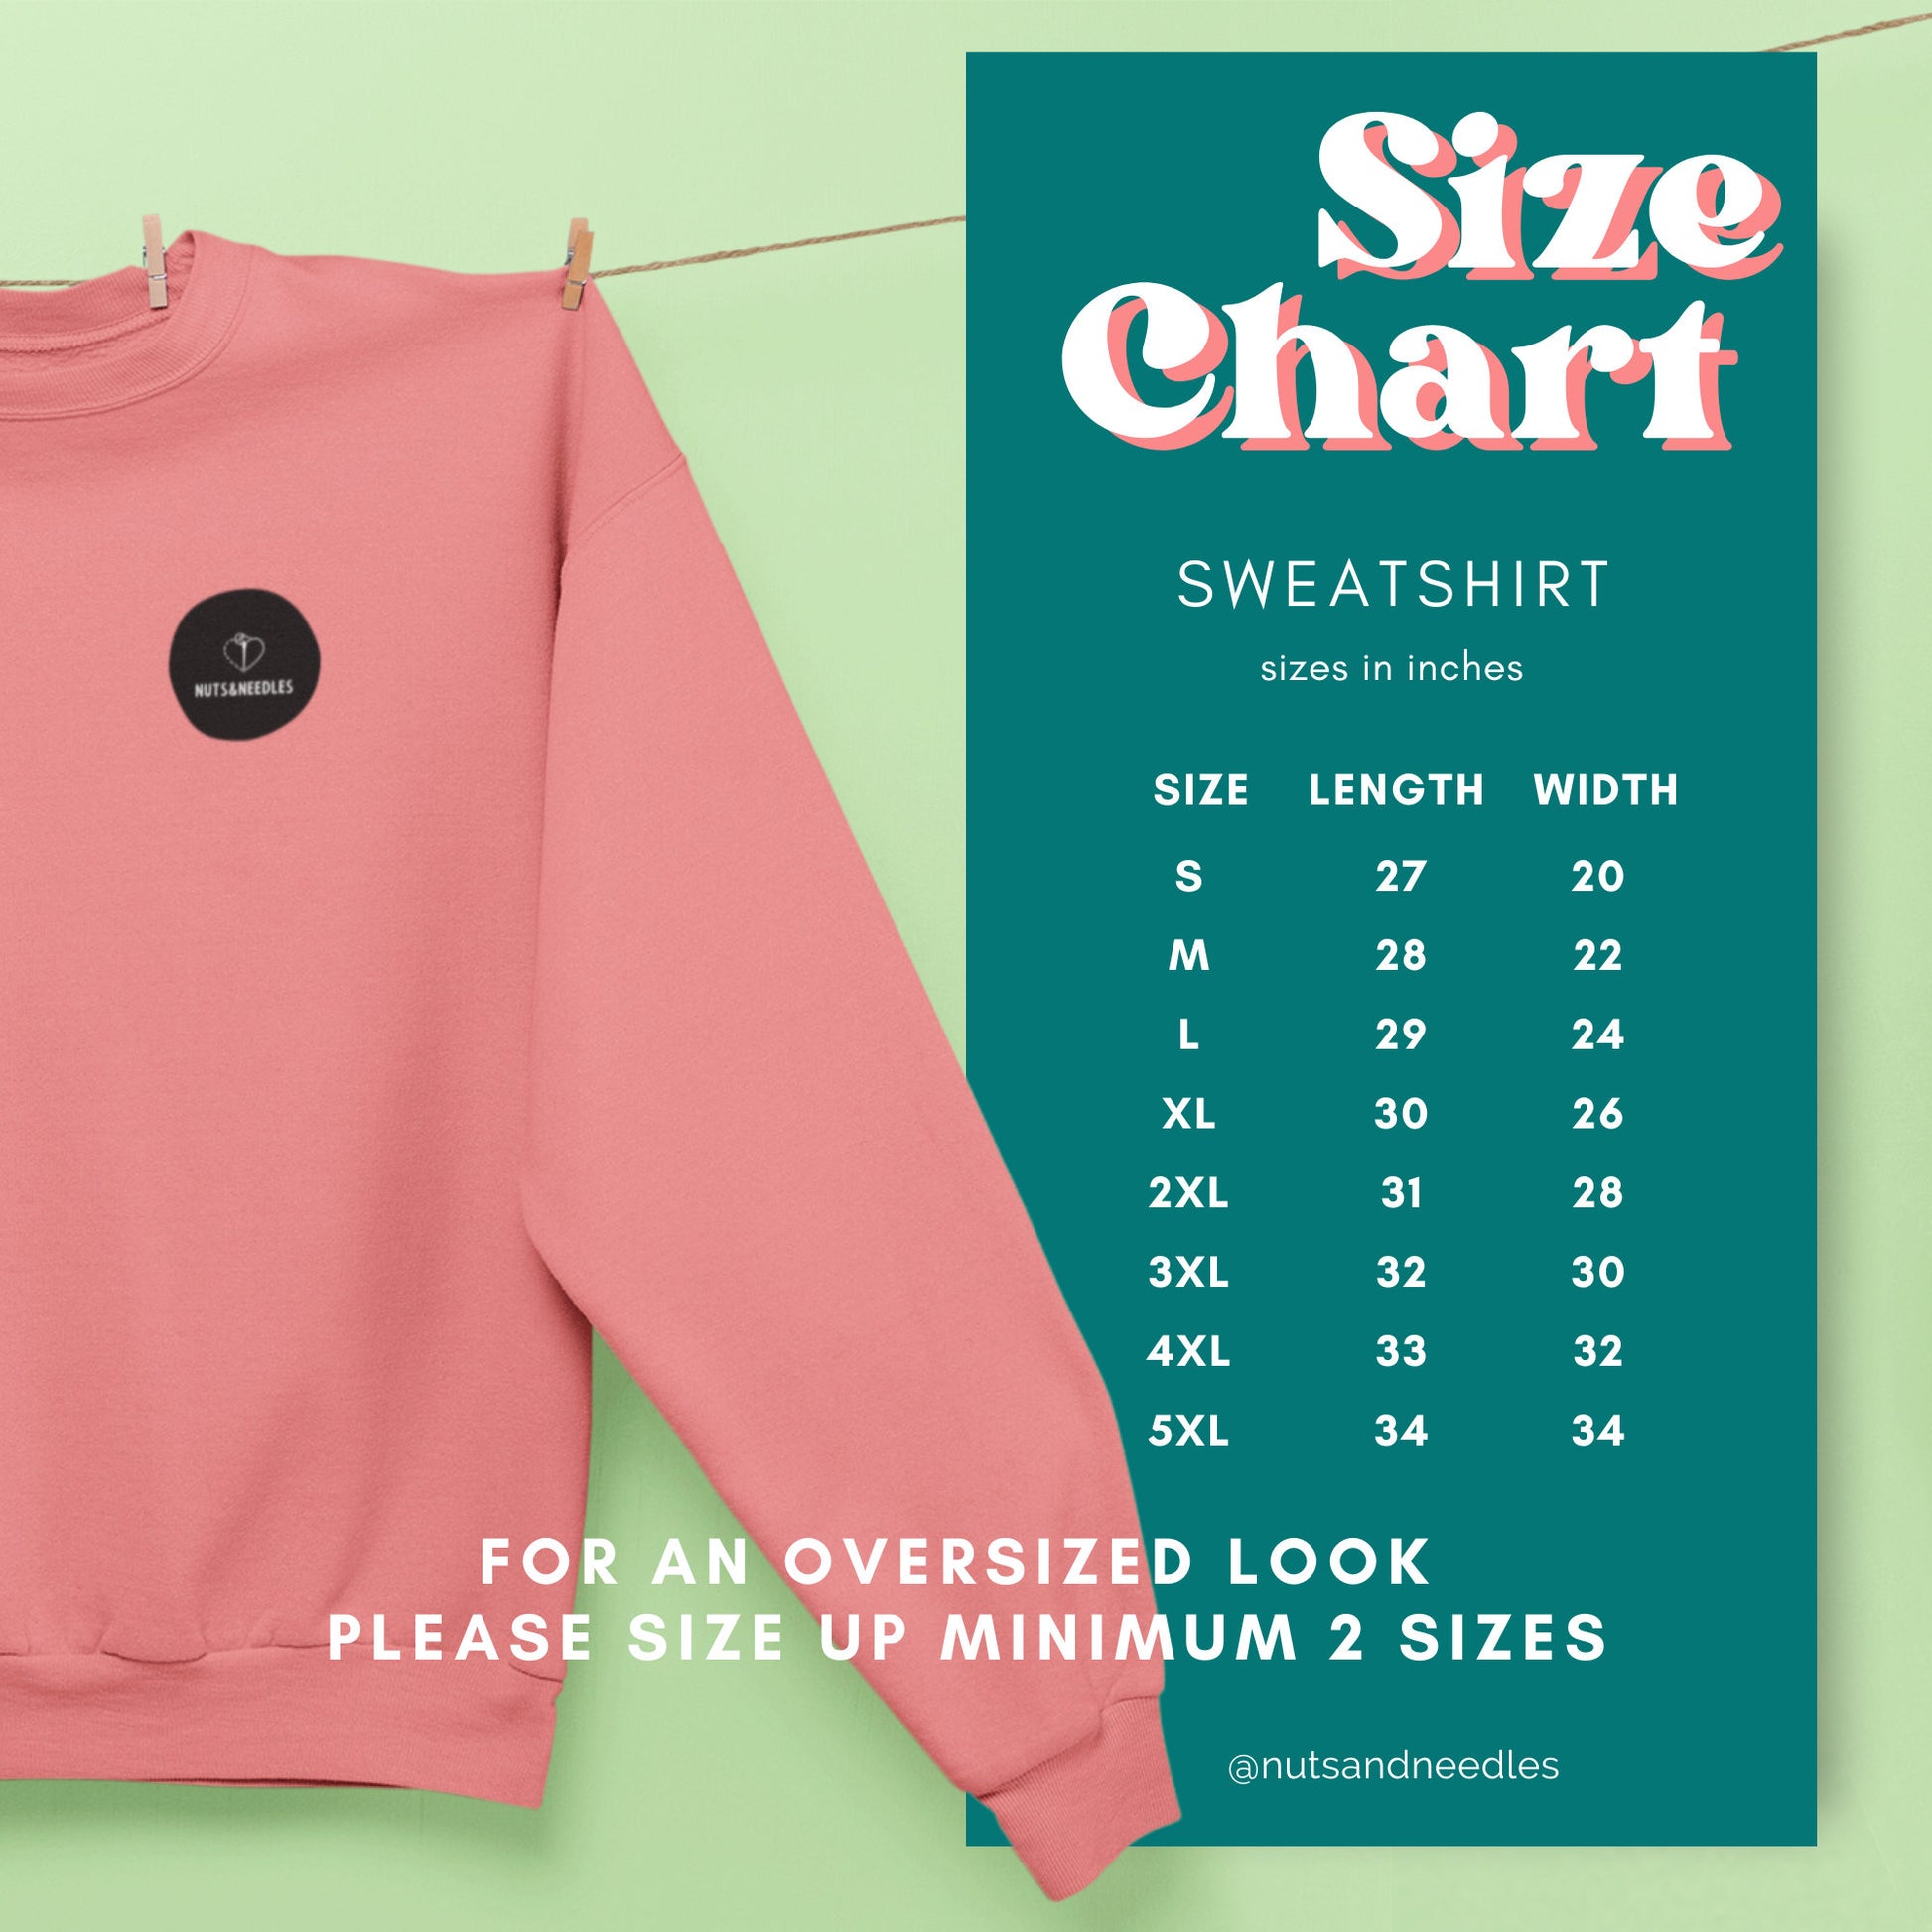 Mental Health Sweatshirt 'Self Love Candy', Valentines Day, Self Love, Self Care, Part of Profit donated to charity, Valentines Gift